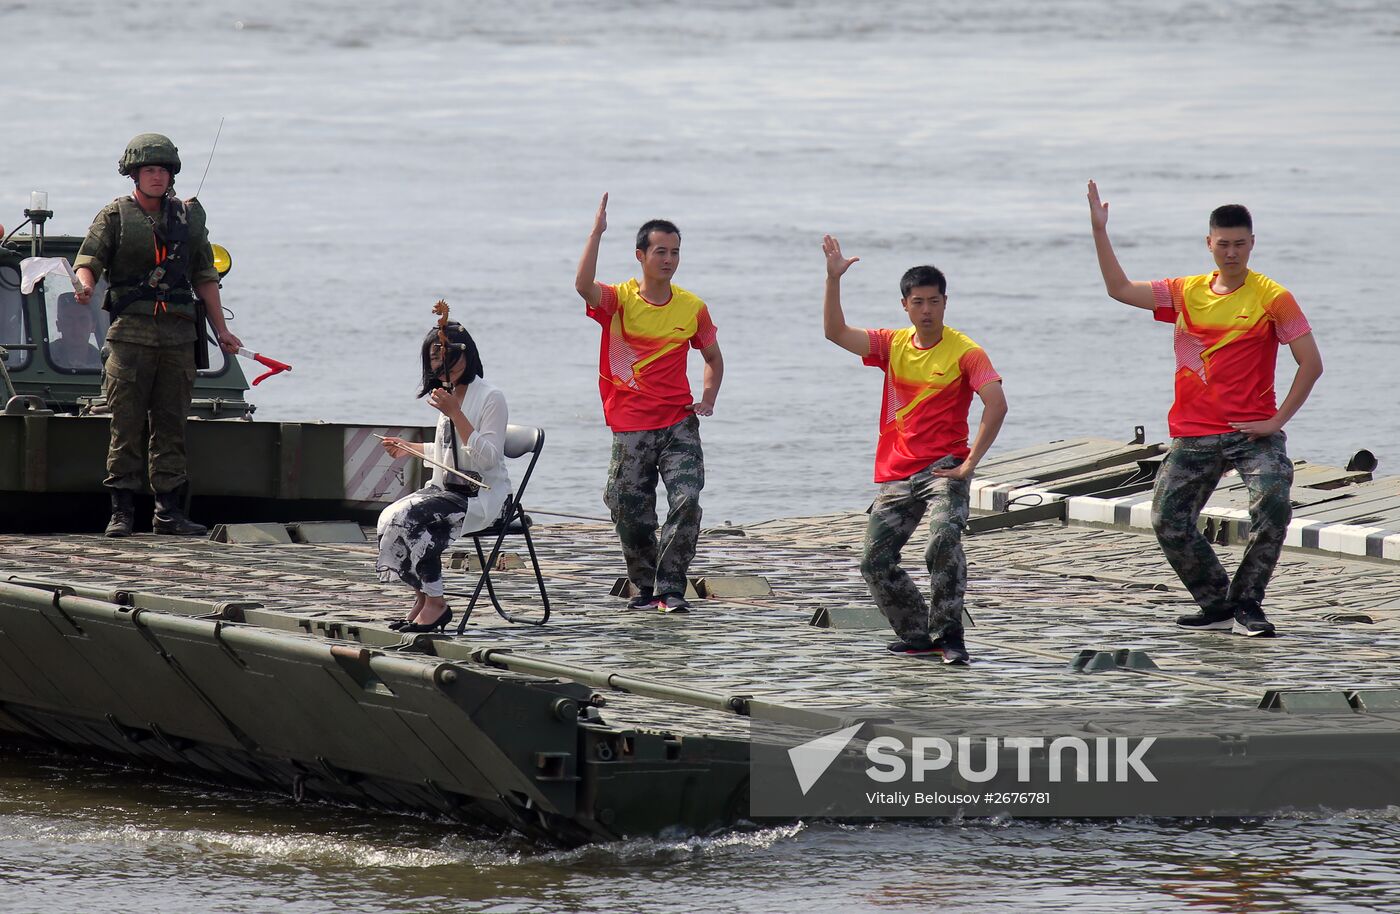 Open Water engineering troops competition